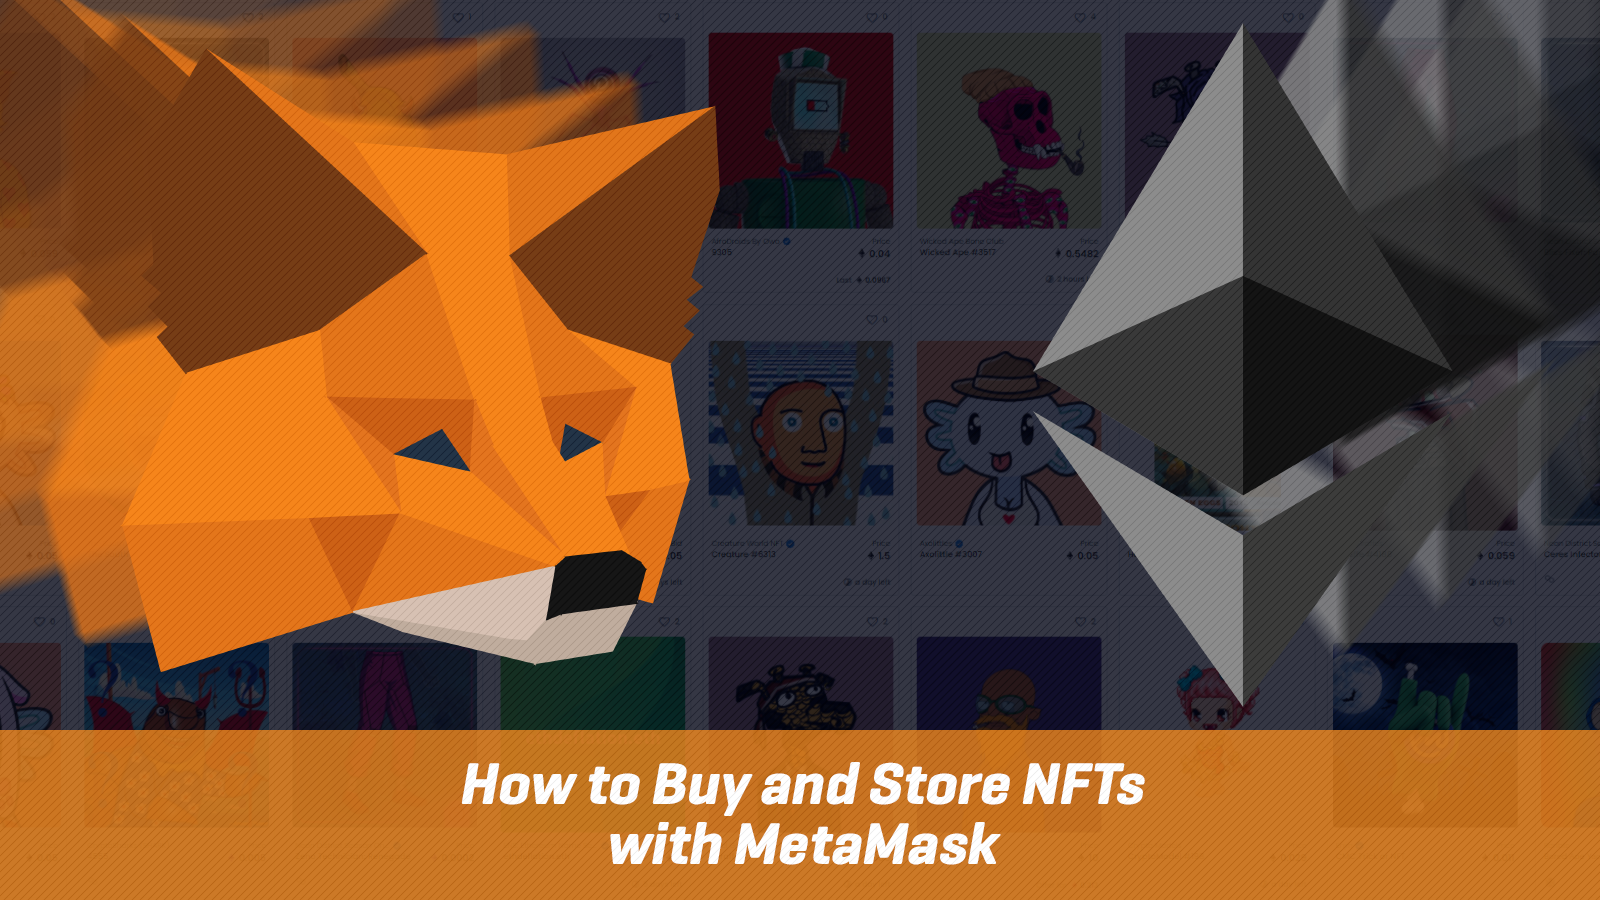 How to Buy and Store NFTs with MetaMask